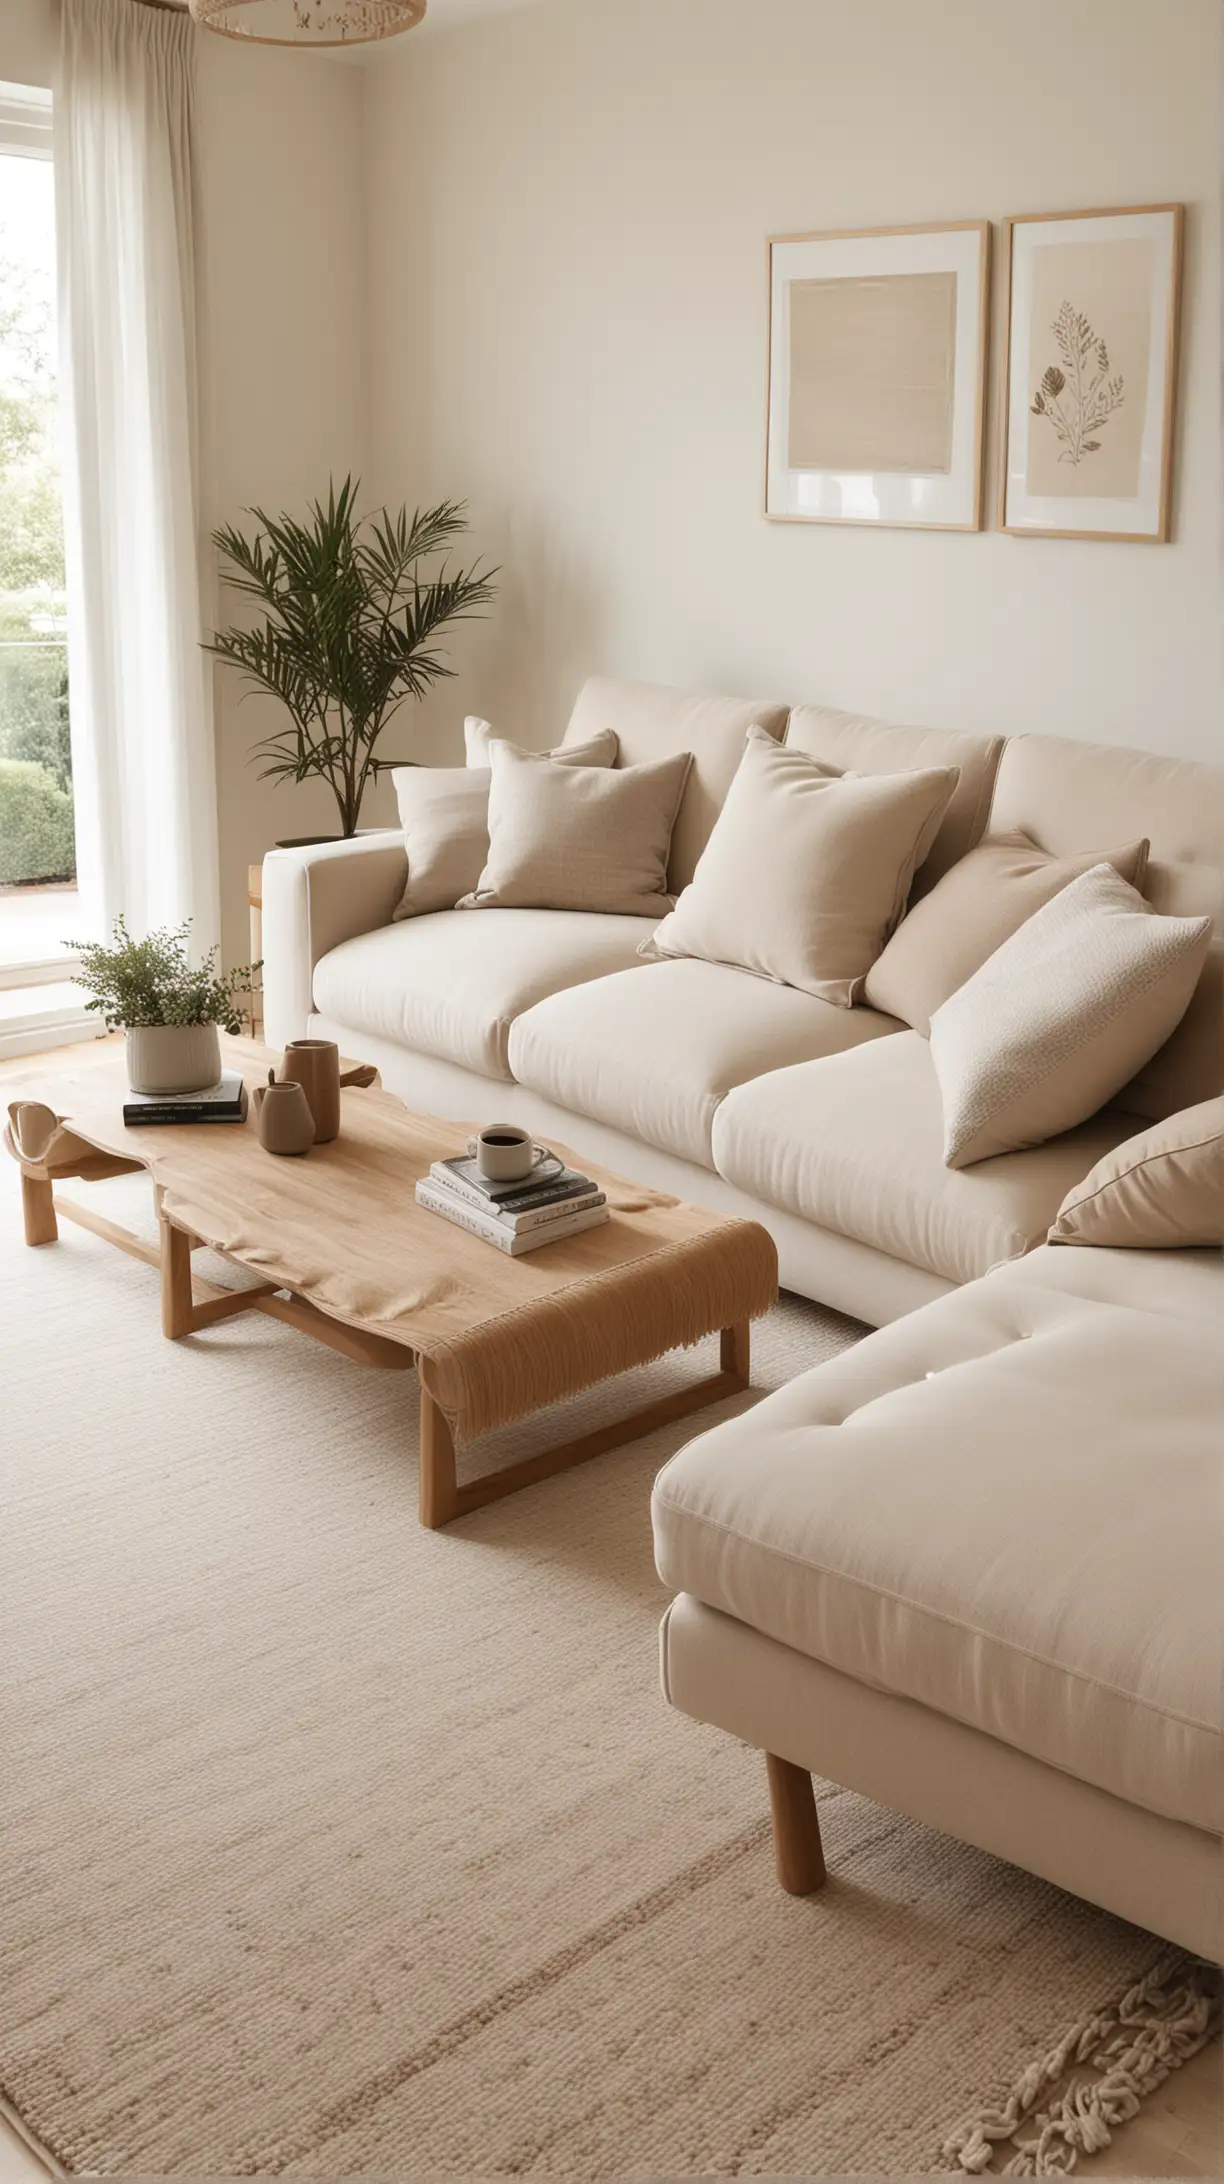 Living room with neutral-toned fabrics on upholstery and rugs, creating a calm and cohesive minimalist environment.